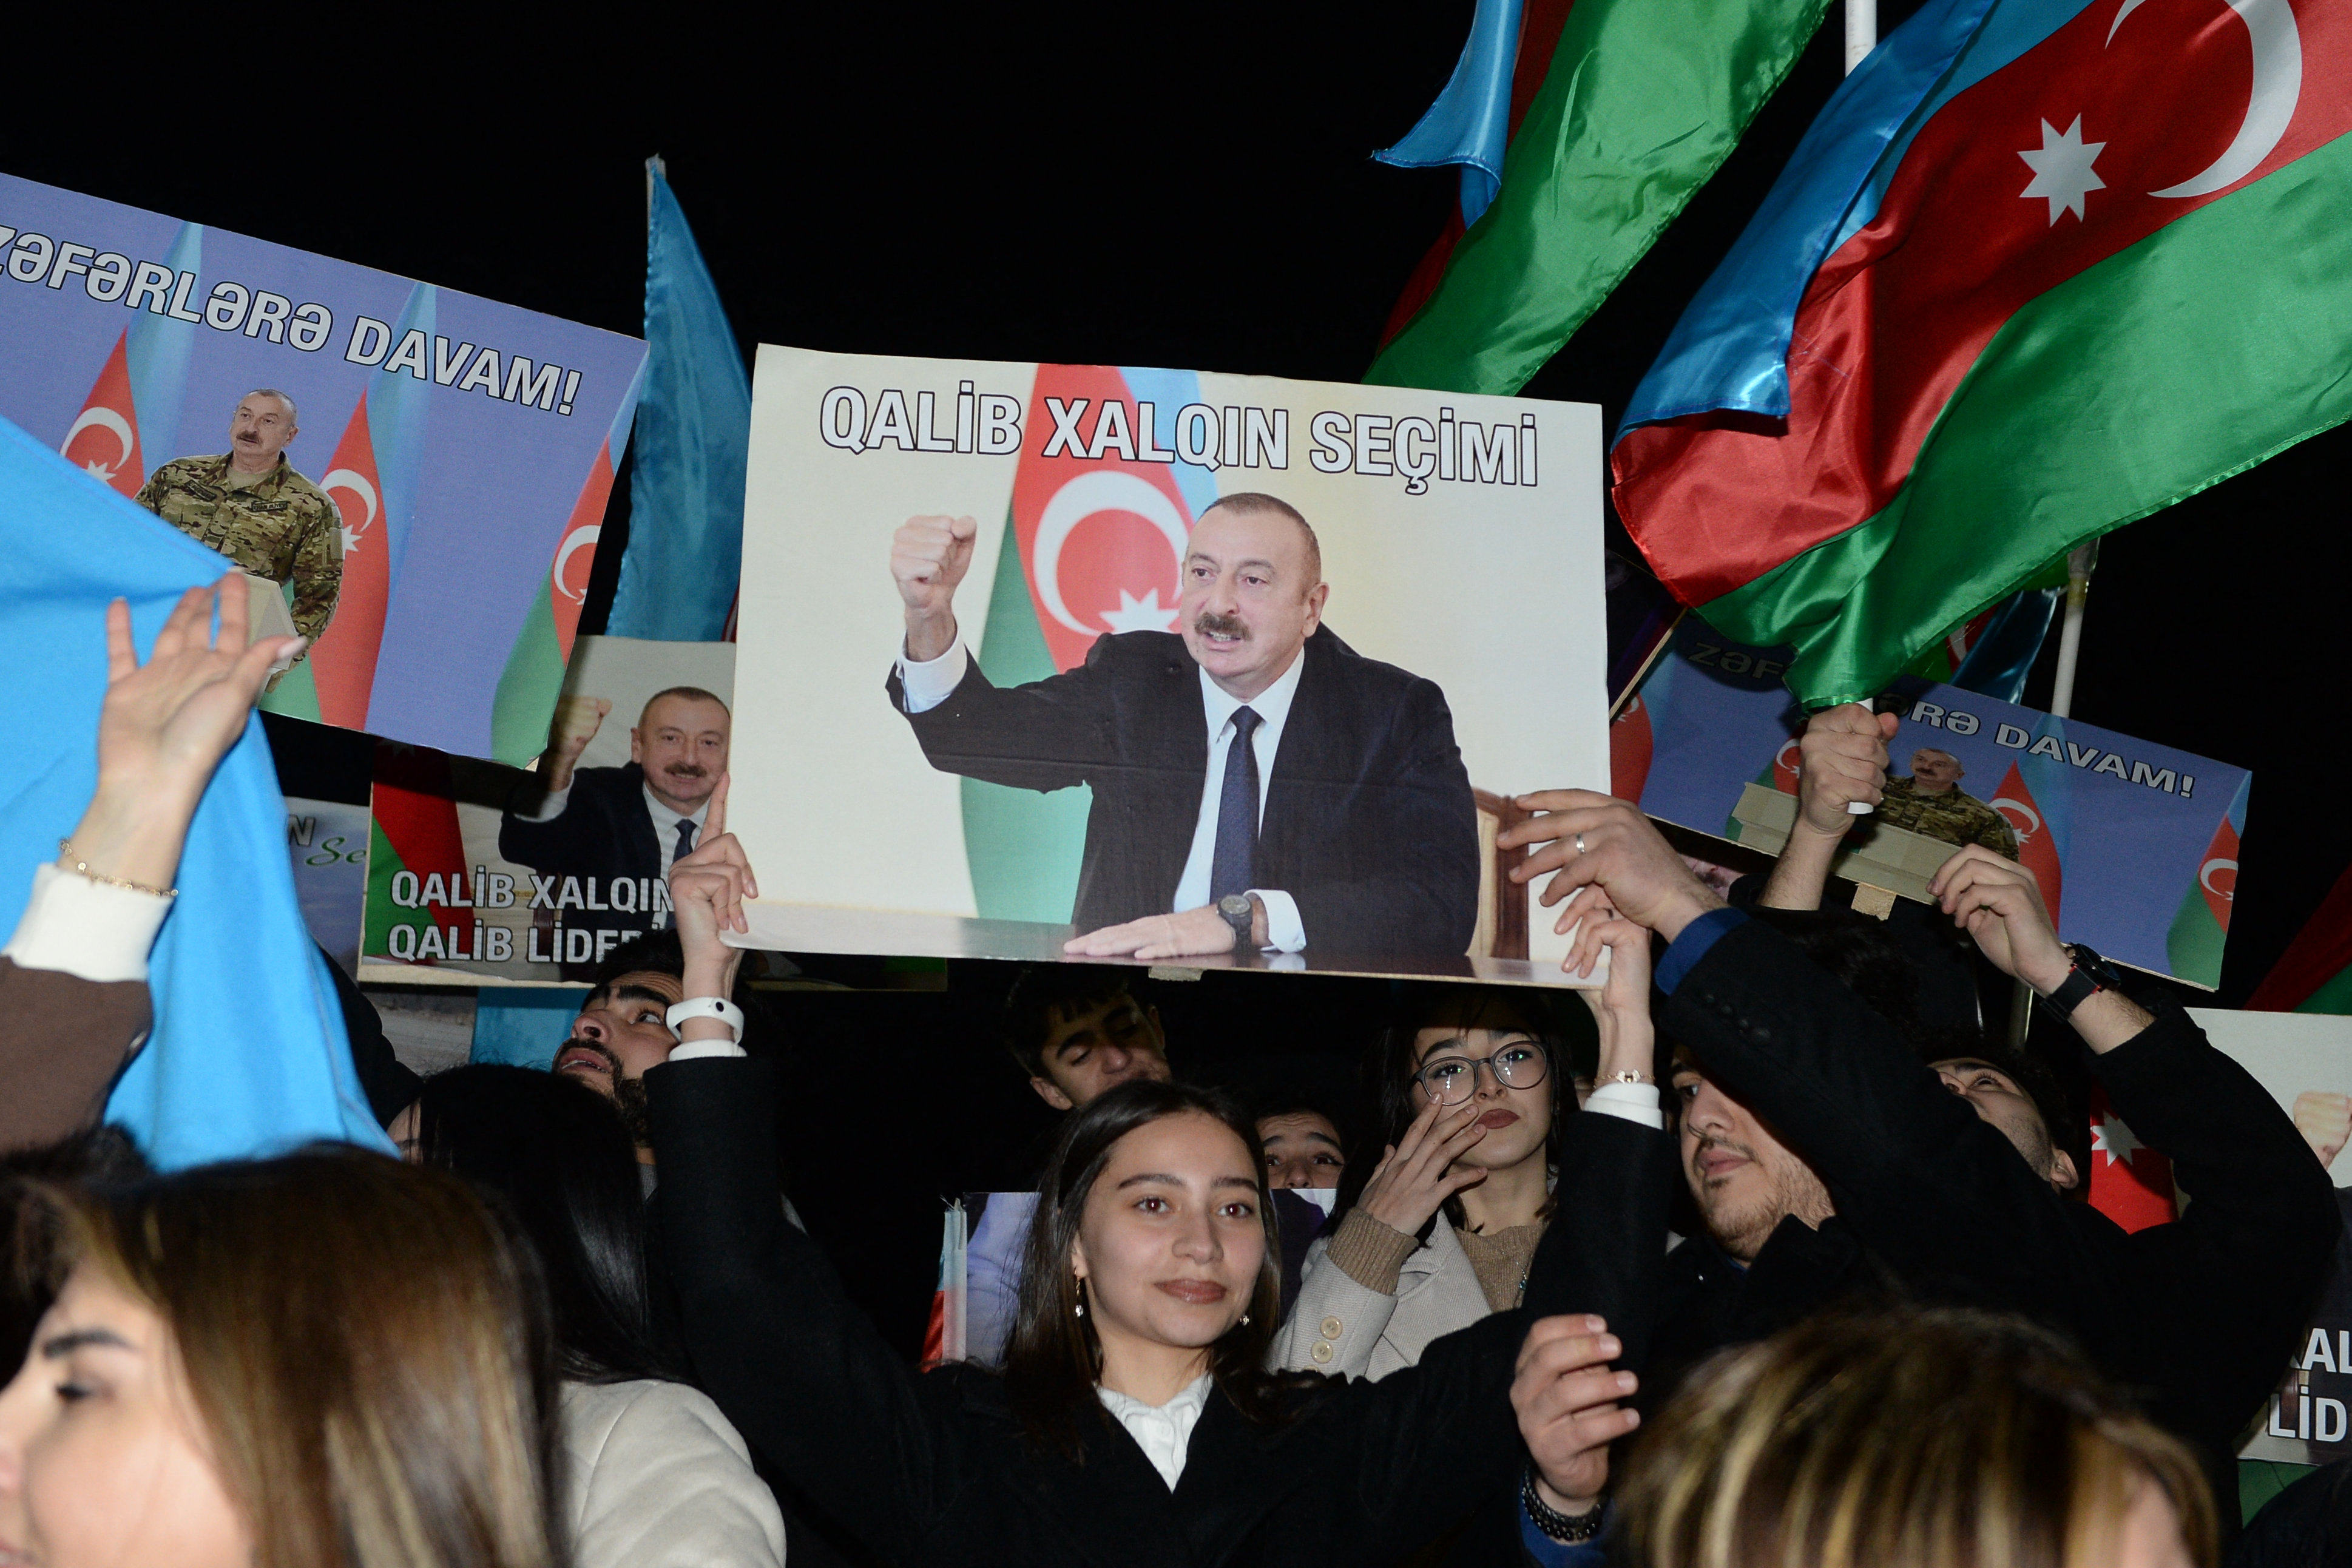 Supporters of Azerbaijani President Ilham Aliyev after polls closed in Baku. Photo: AFP